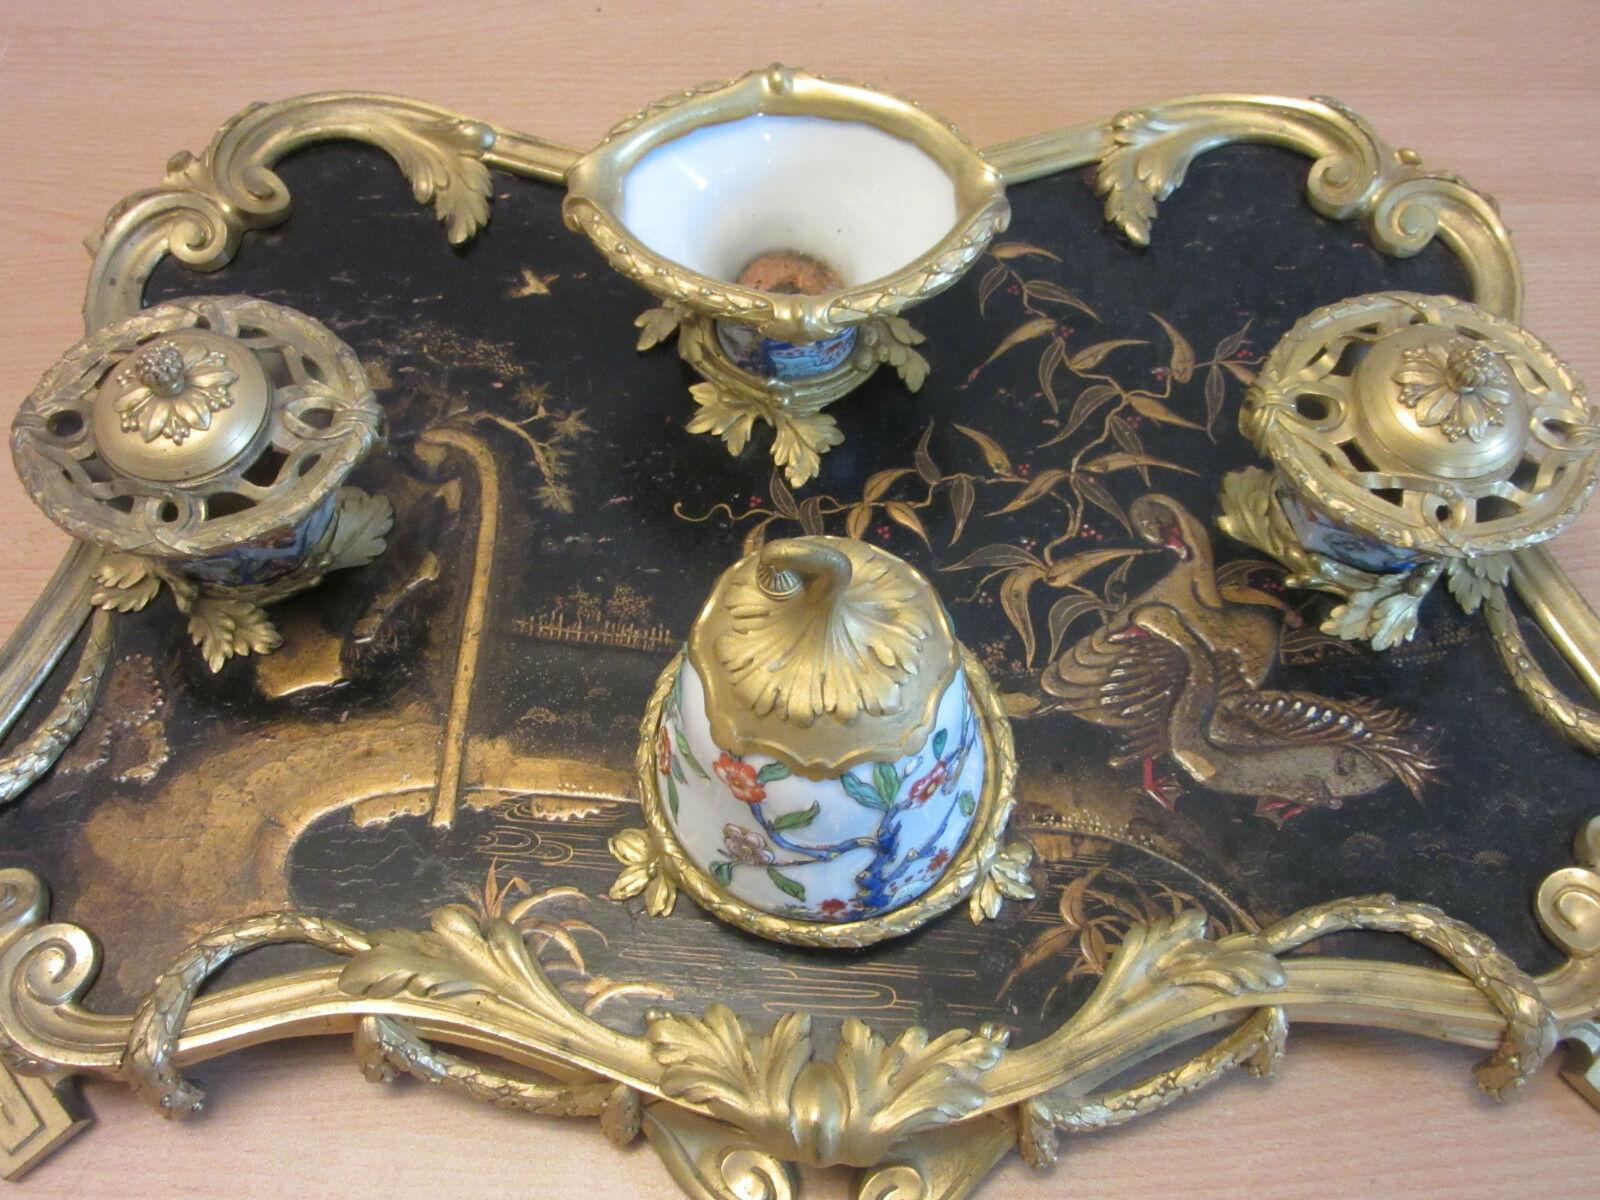 A fine and large 19th century Chinoiserie inkwell with raised decoration and fine gilt bronze mounts. Porcelain inkpots and a porcelain bell.